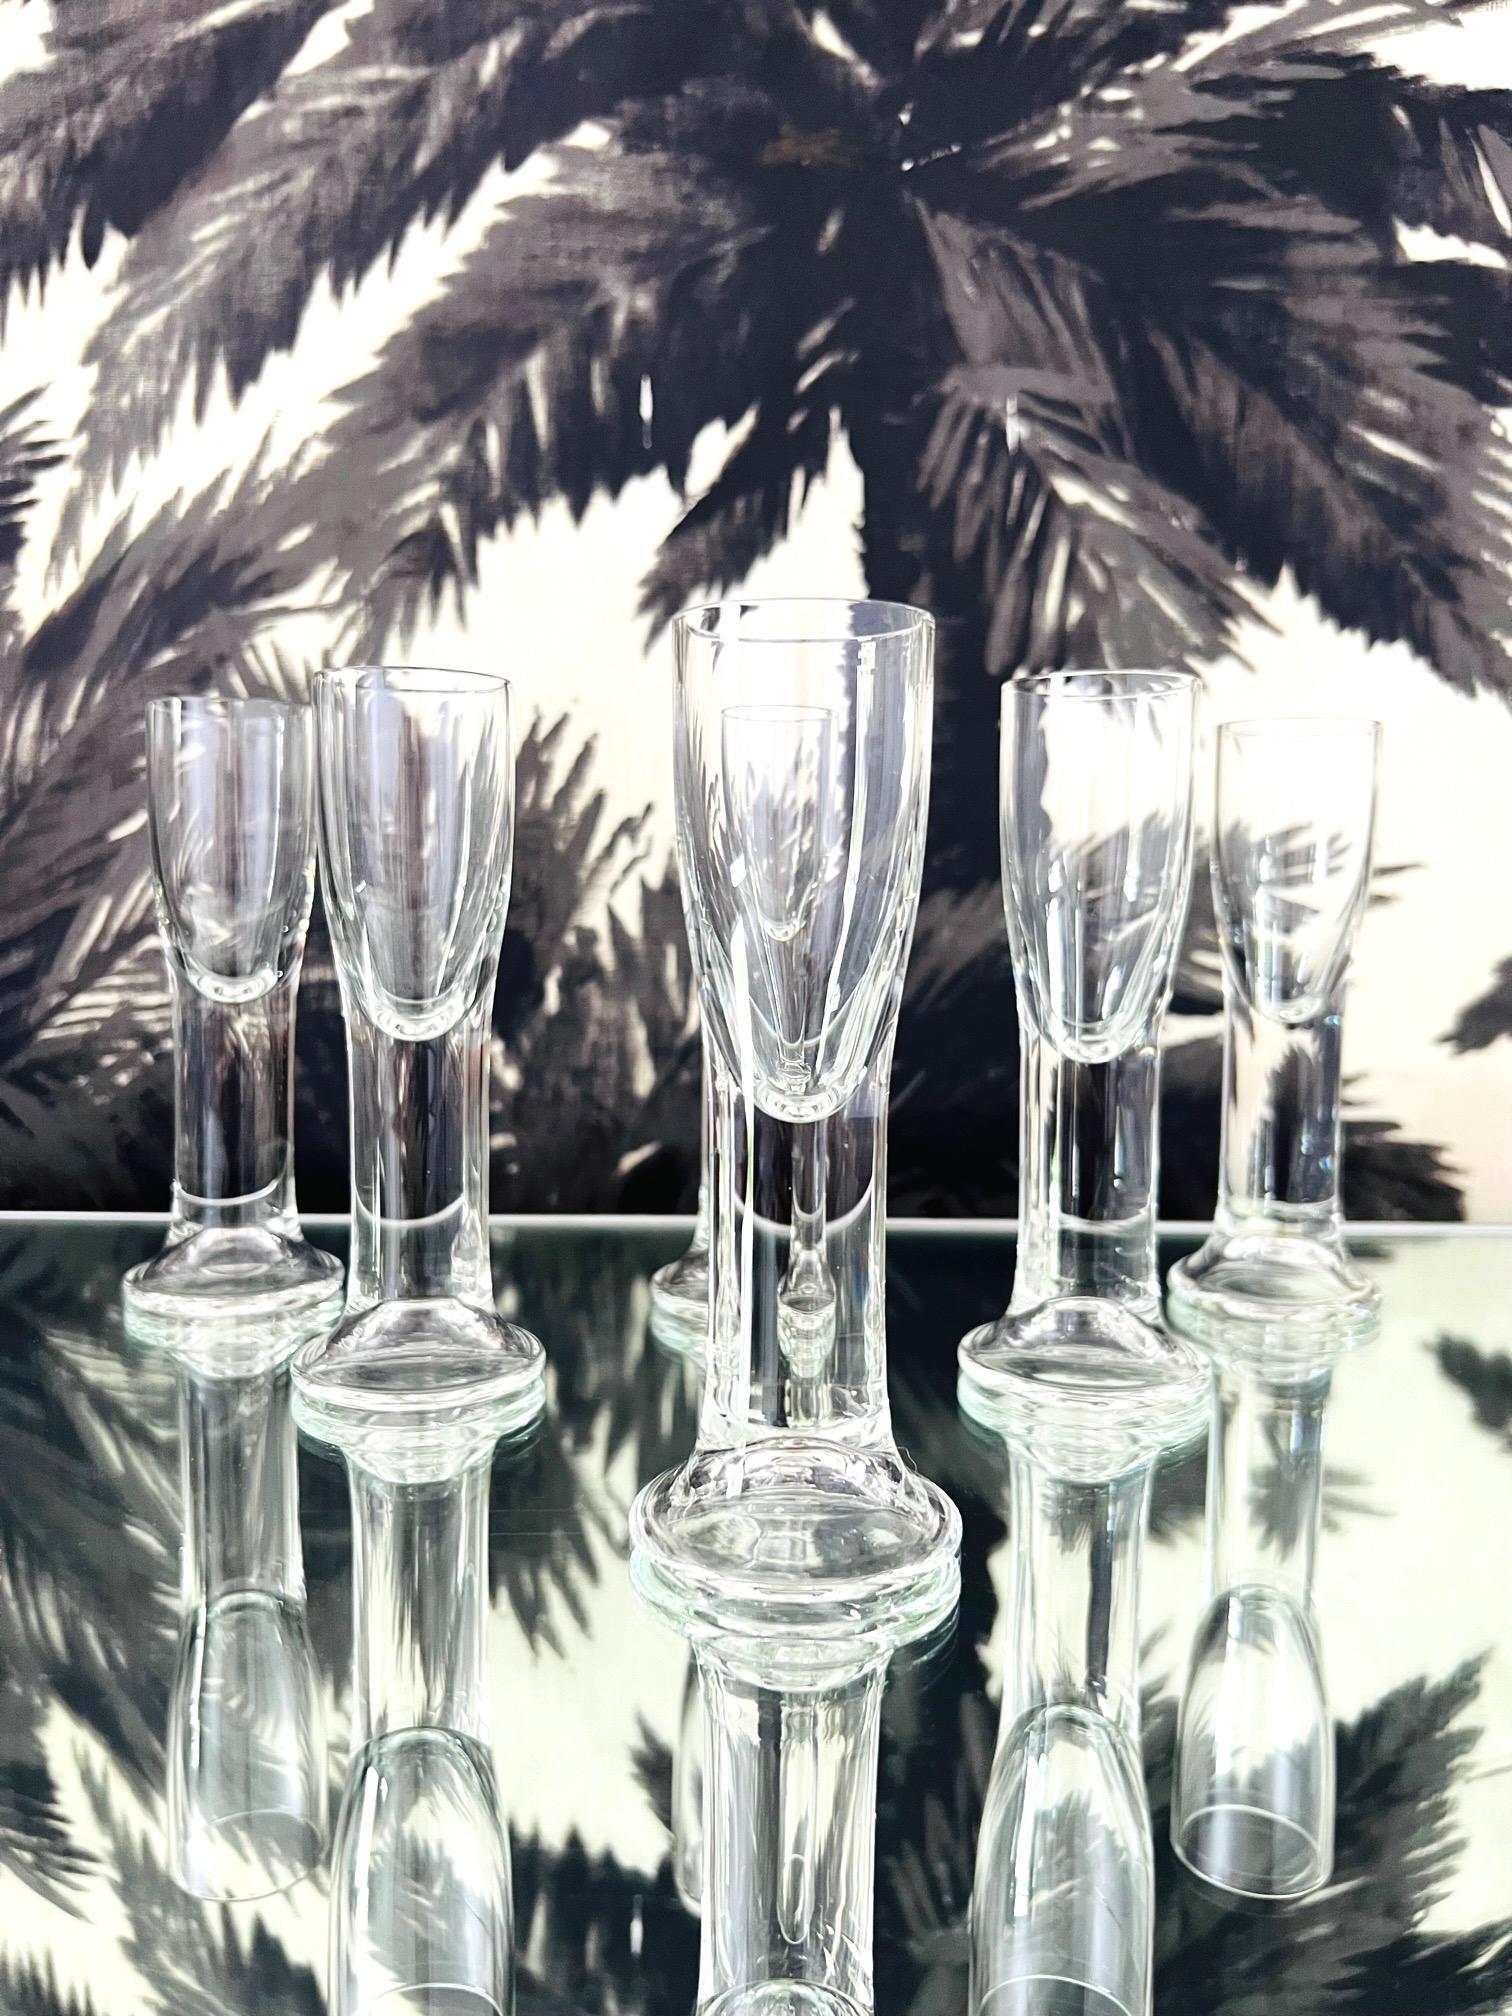 Set of 1980's crystal liqueur glasses from Czech Republic. The set includes six handblown tulip glasses with thick rounded and polished glass edges. Perfect as shot glasses or as cordials. Makes a chic addition to any barware or tableware setting.